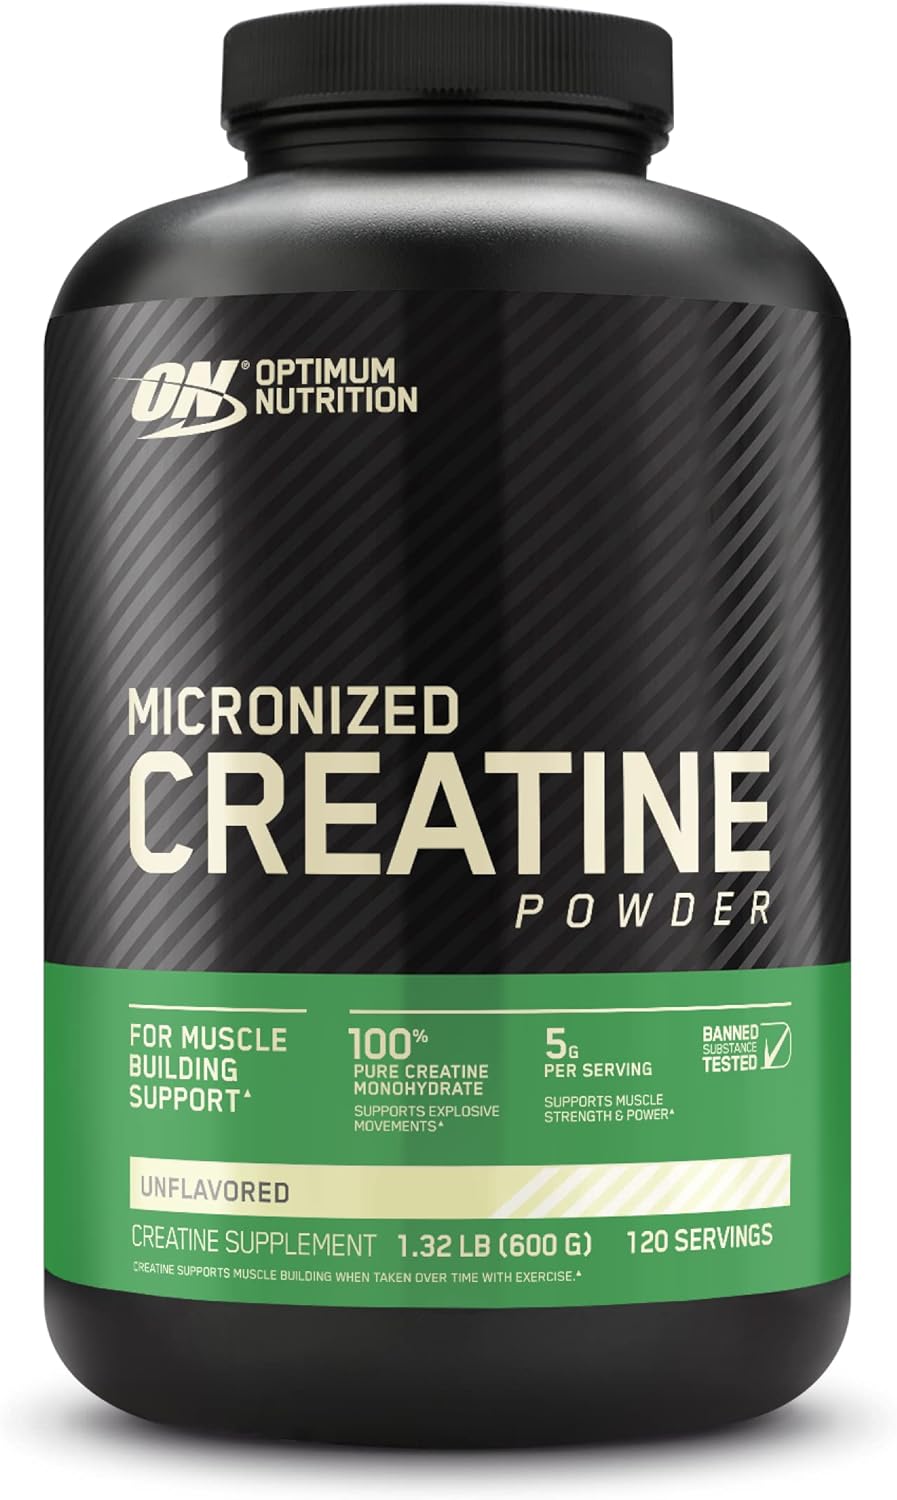 Optimum Nutrition Micronized Creatine Monohydrate Powder, Unflavored, Keto Friendly, 120 Servings (Packaging May Vary) 